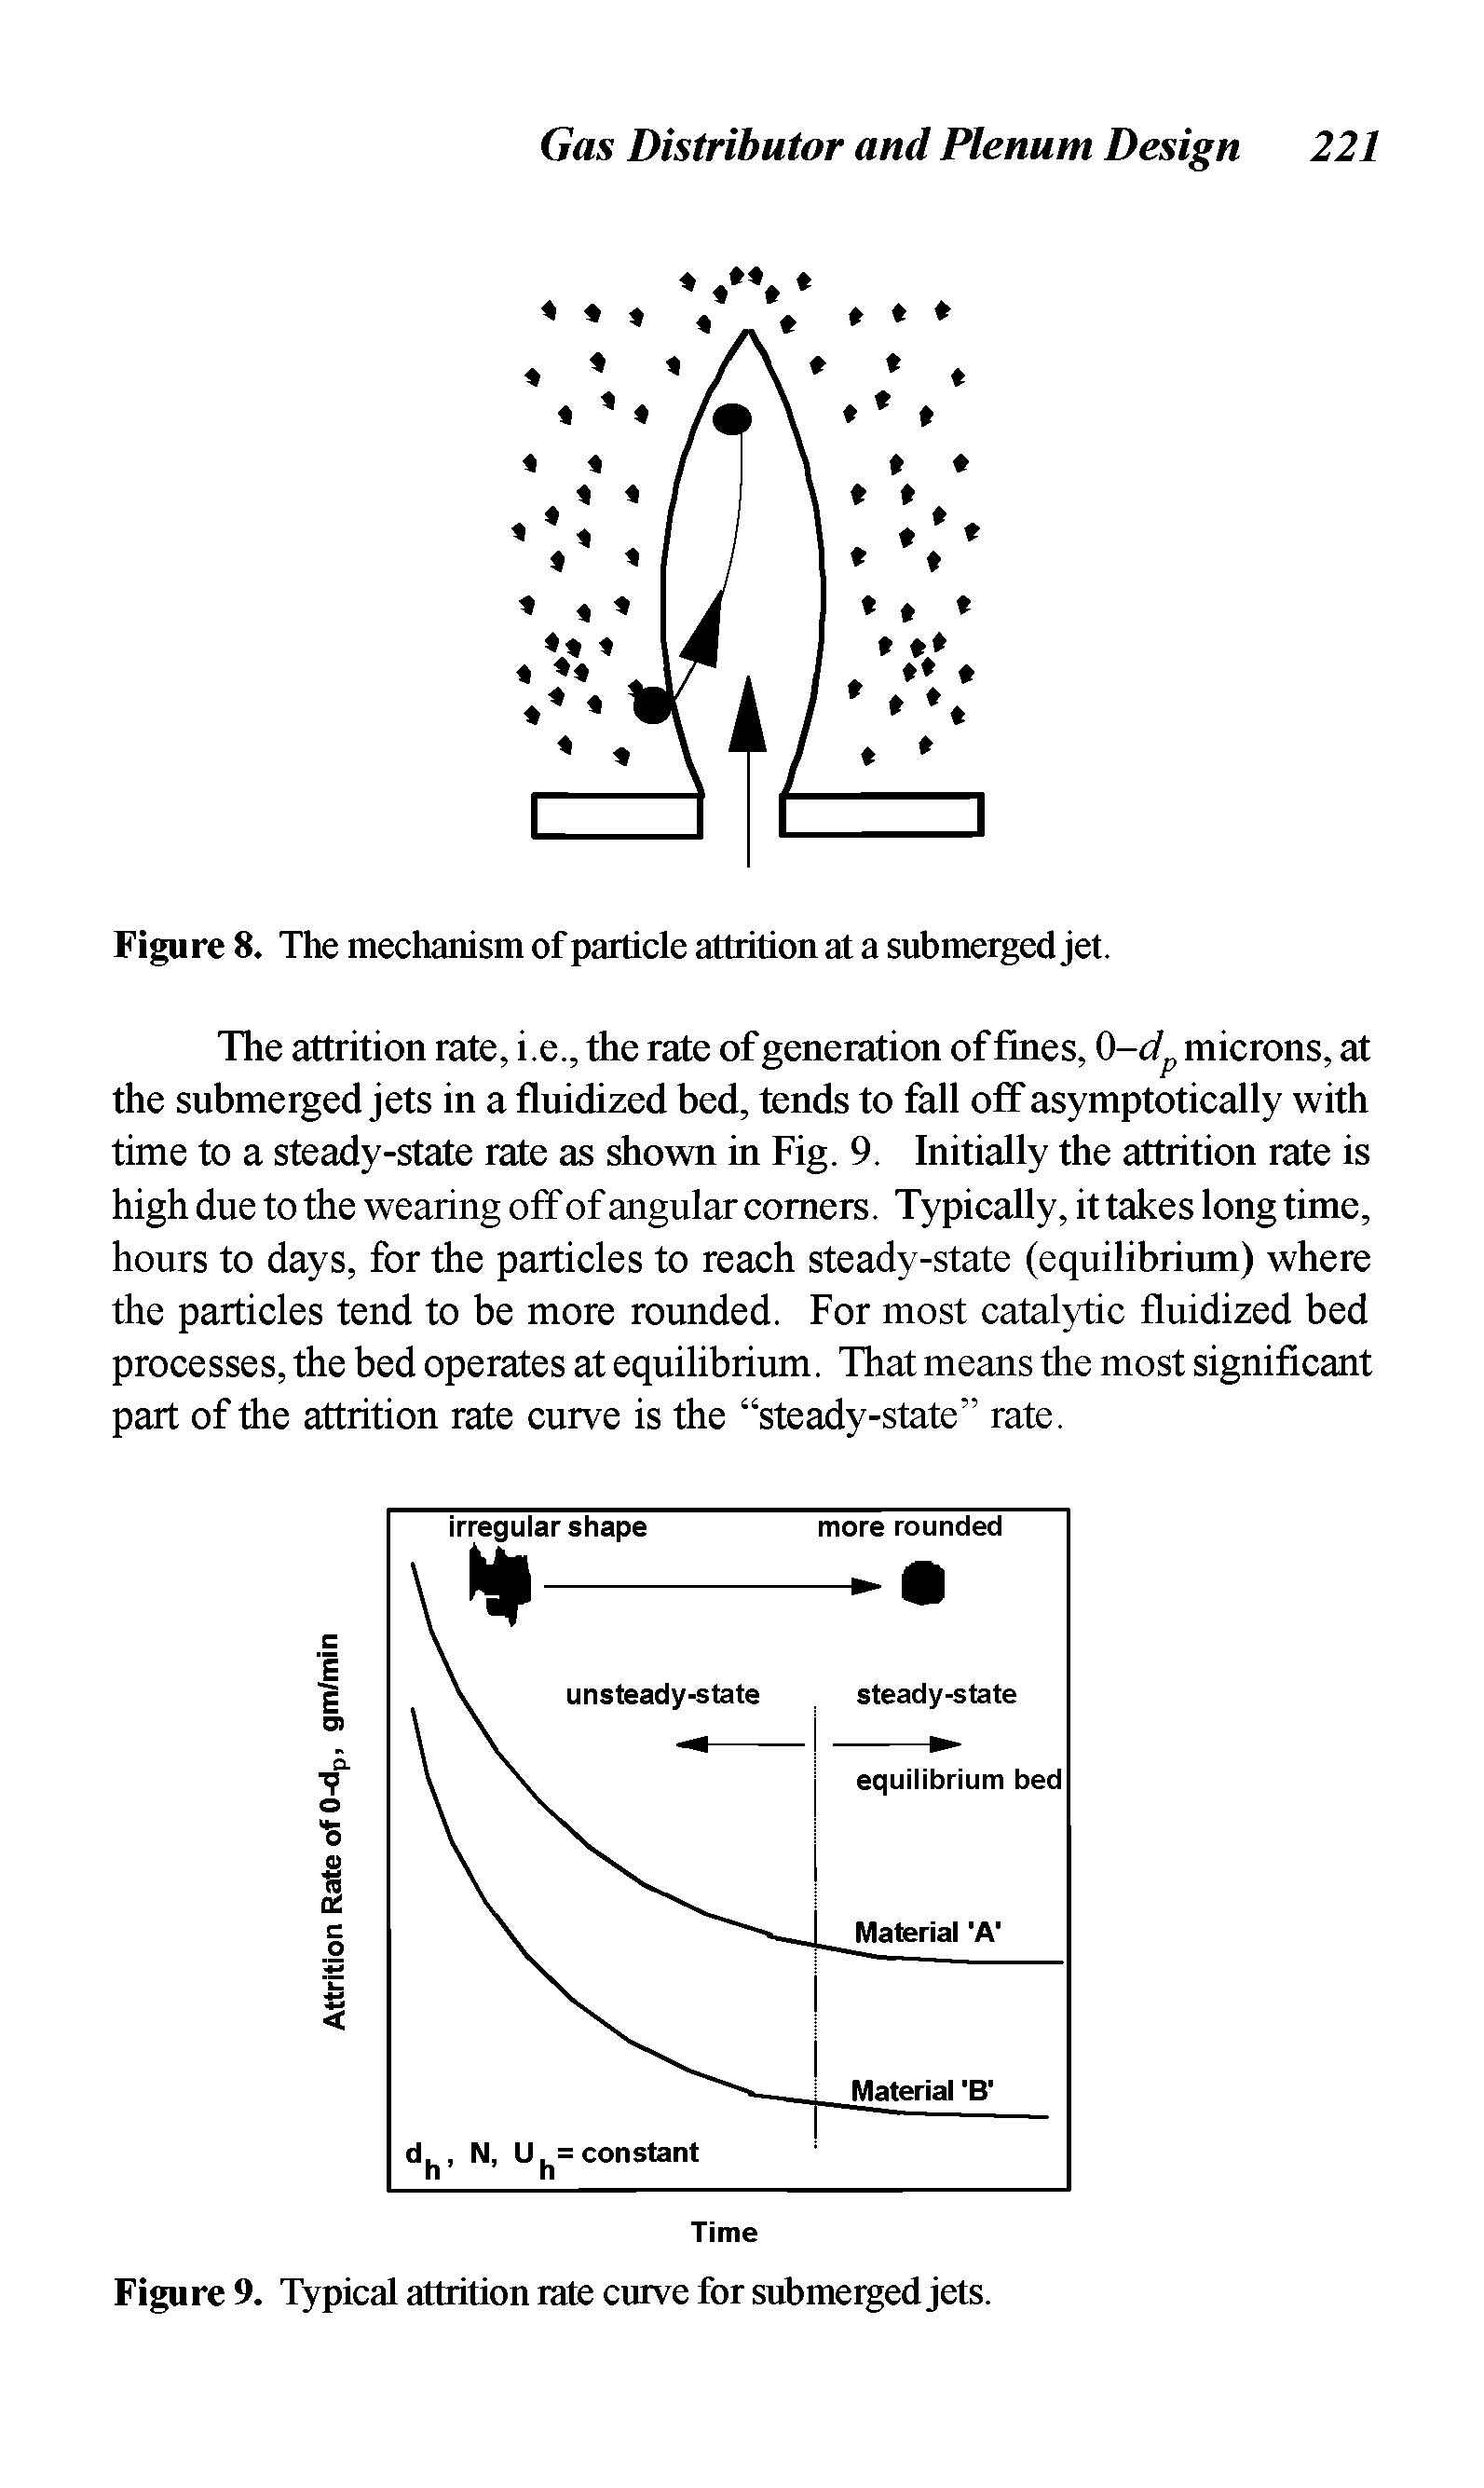 Figure 9. Typical attrition rate curve for submerged jets.